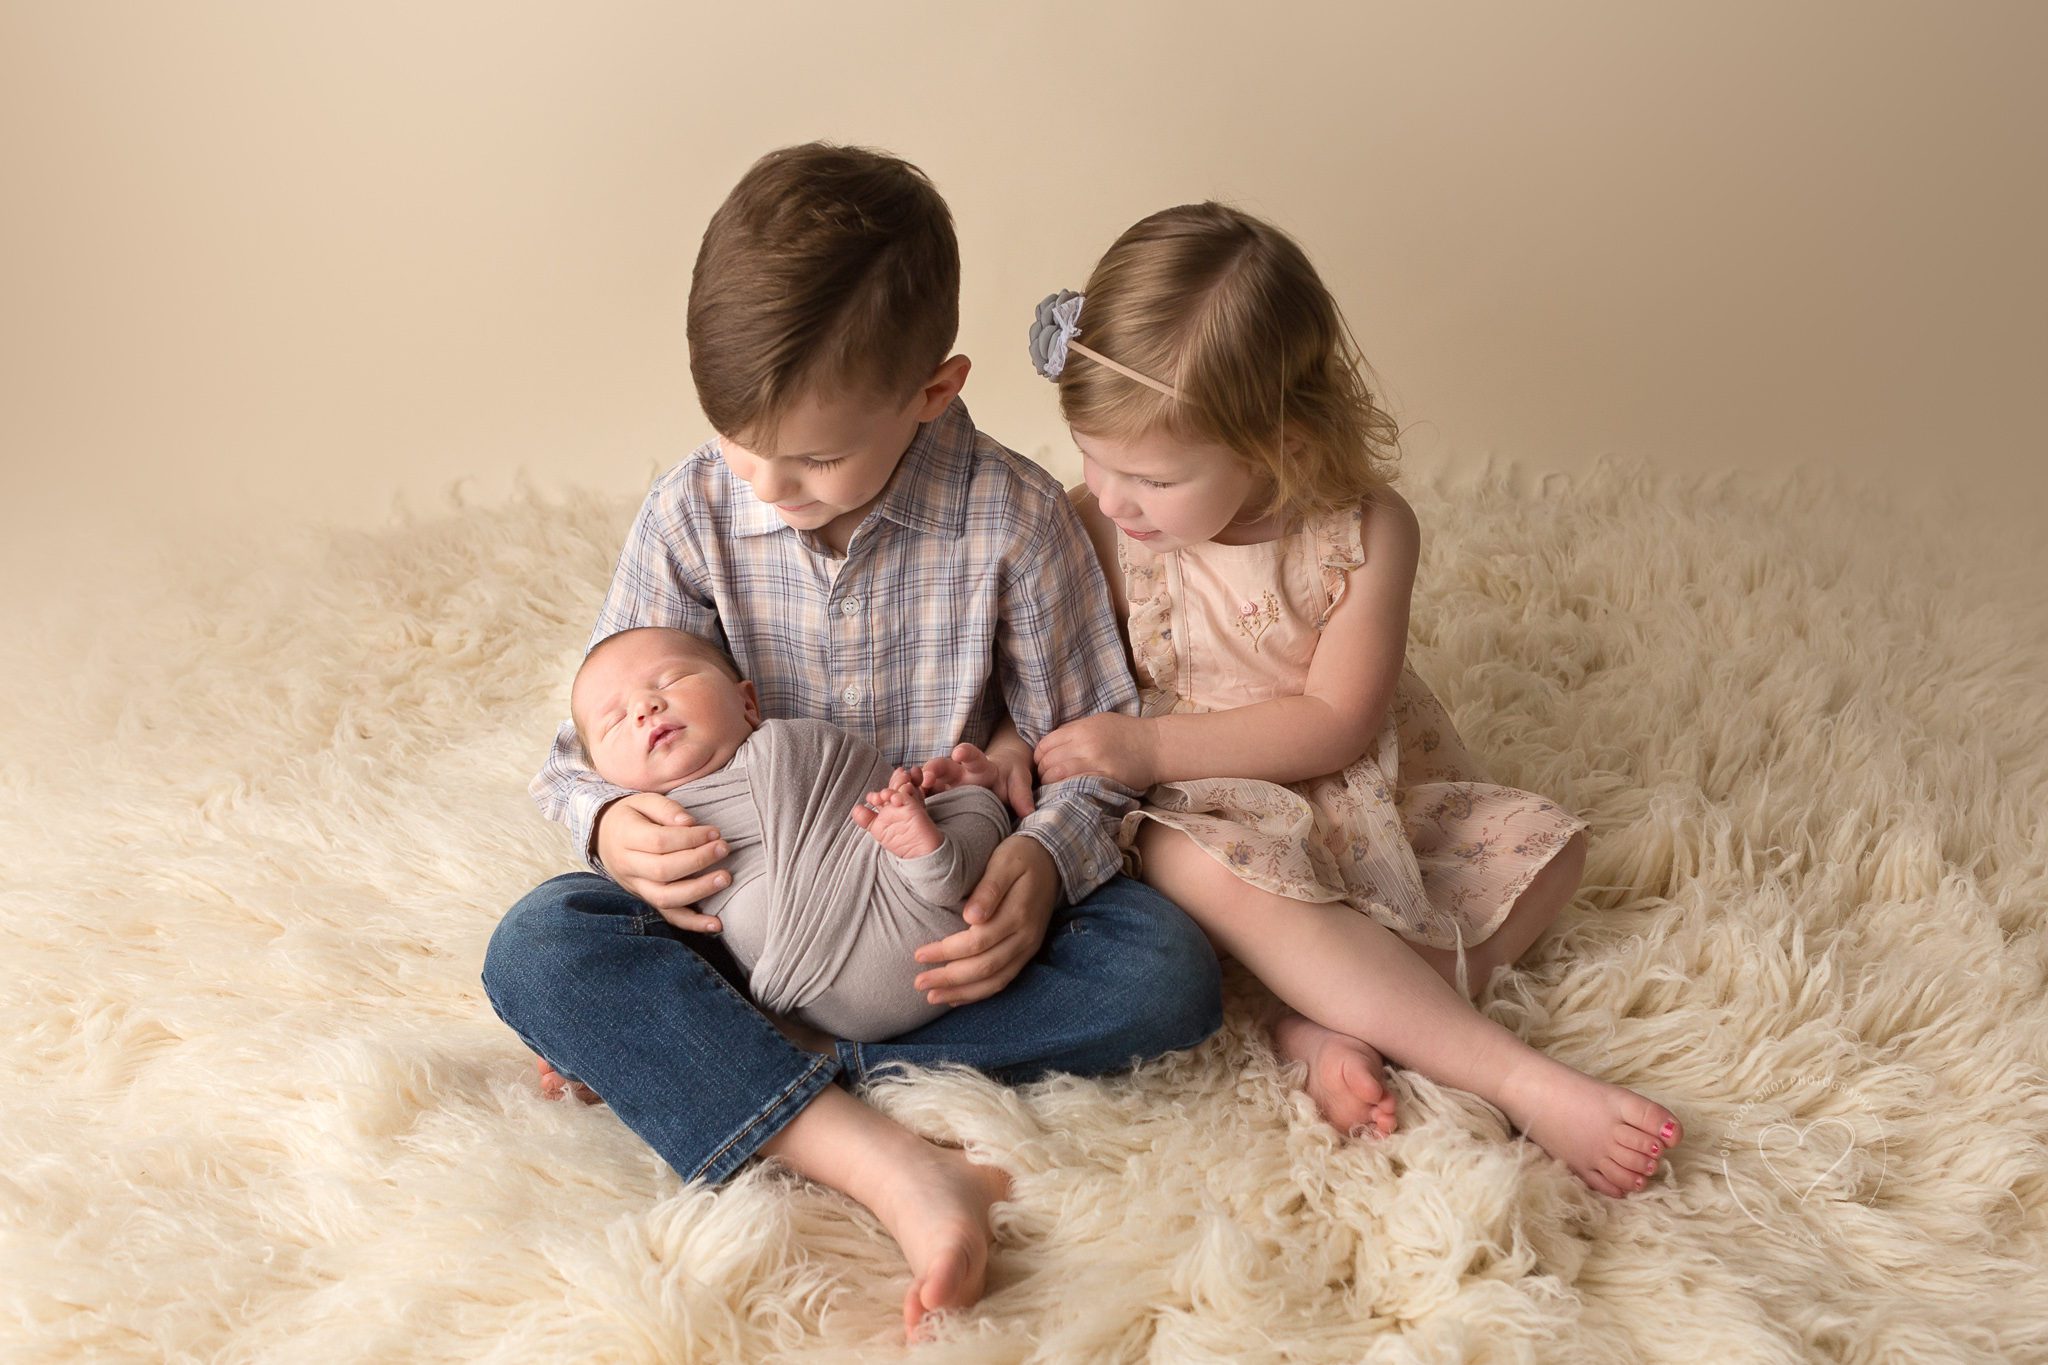 Newborn sibling photography, brother and sister holding newborn brother, Fresno, Clovis, ca